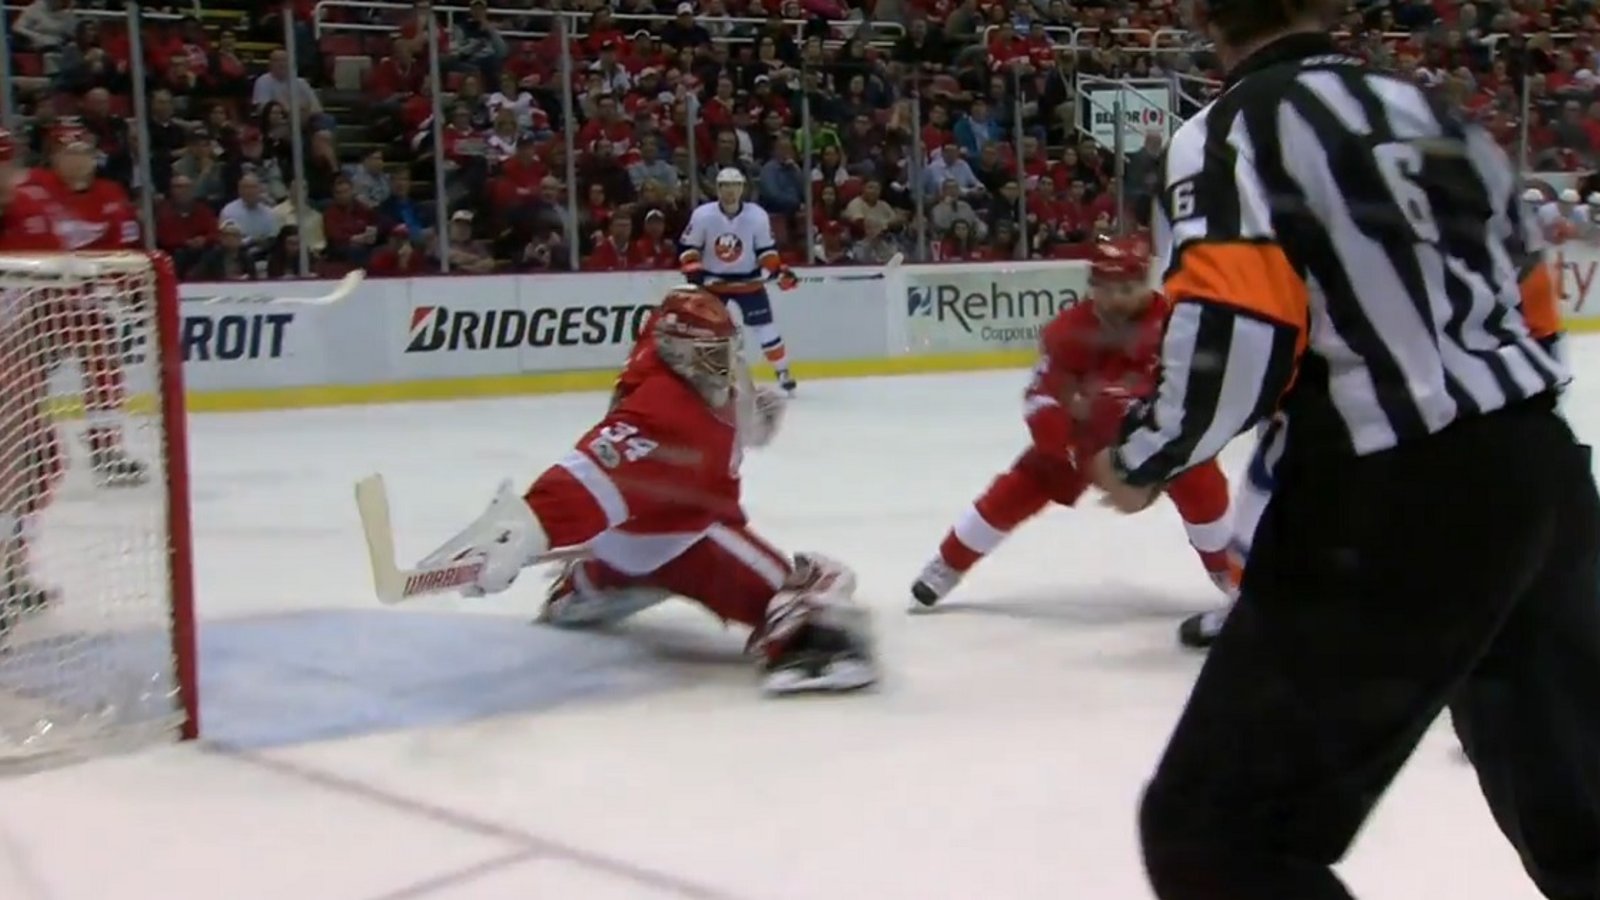 Must see: Mrazek reaches back to rob Tavares with an unbelievable paddle save.